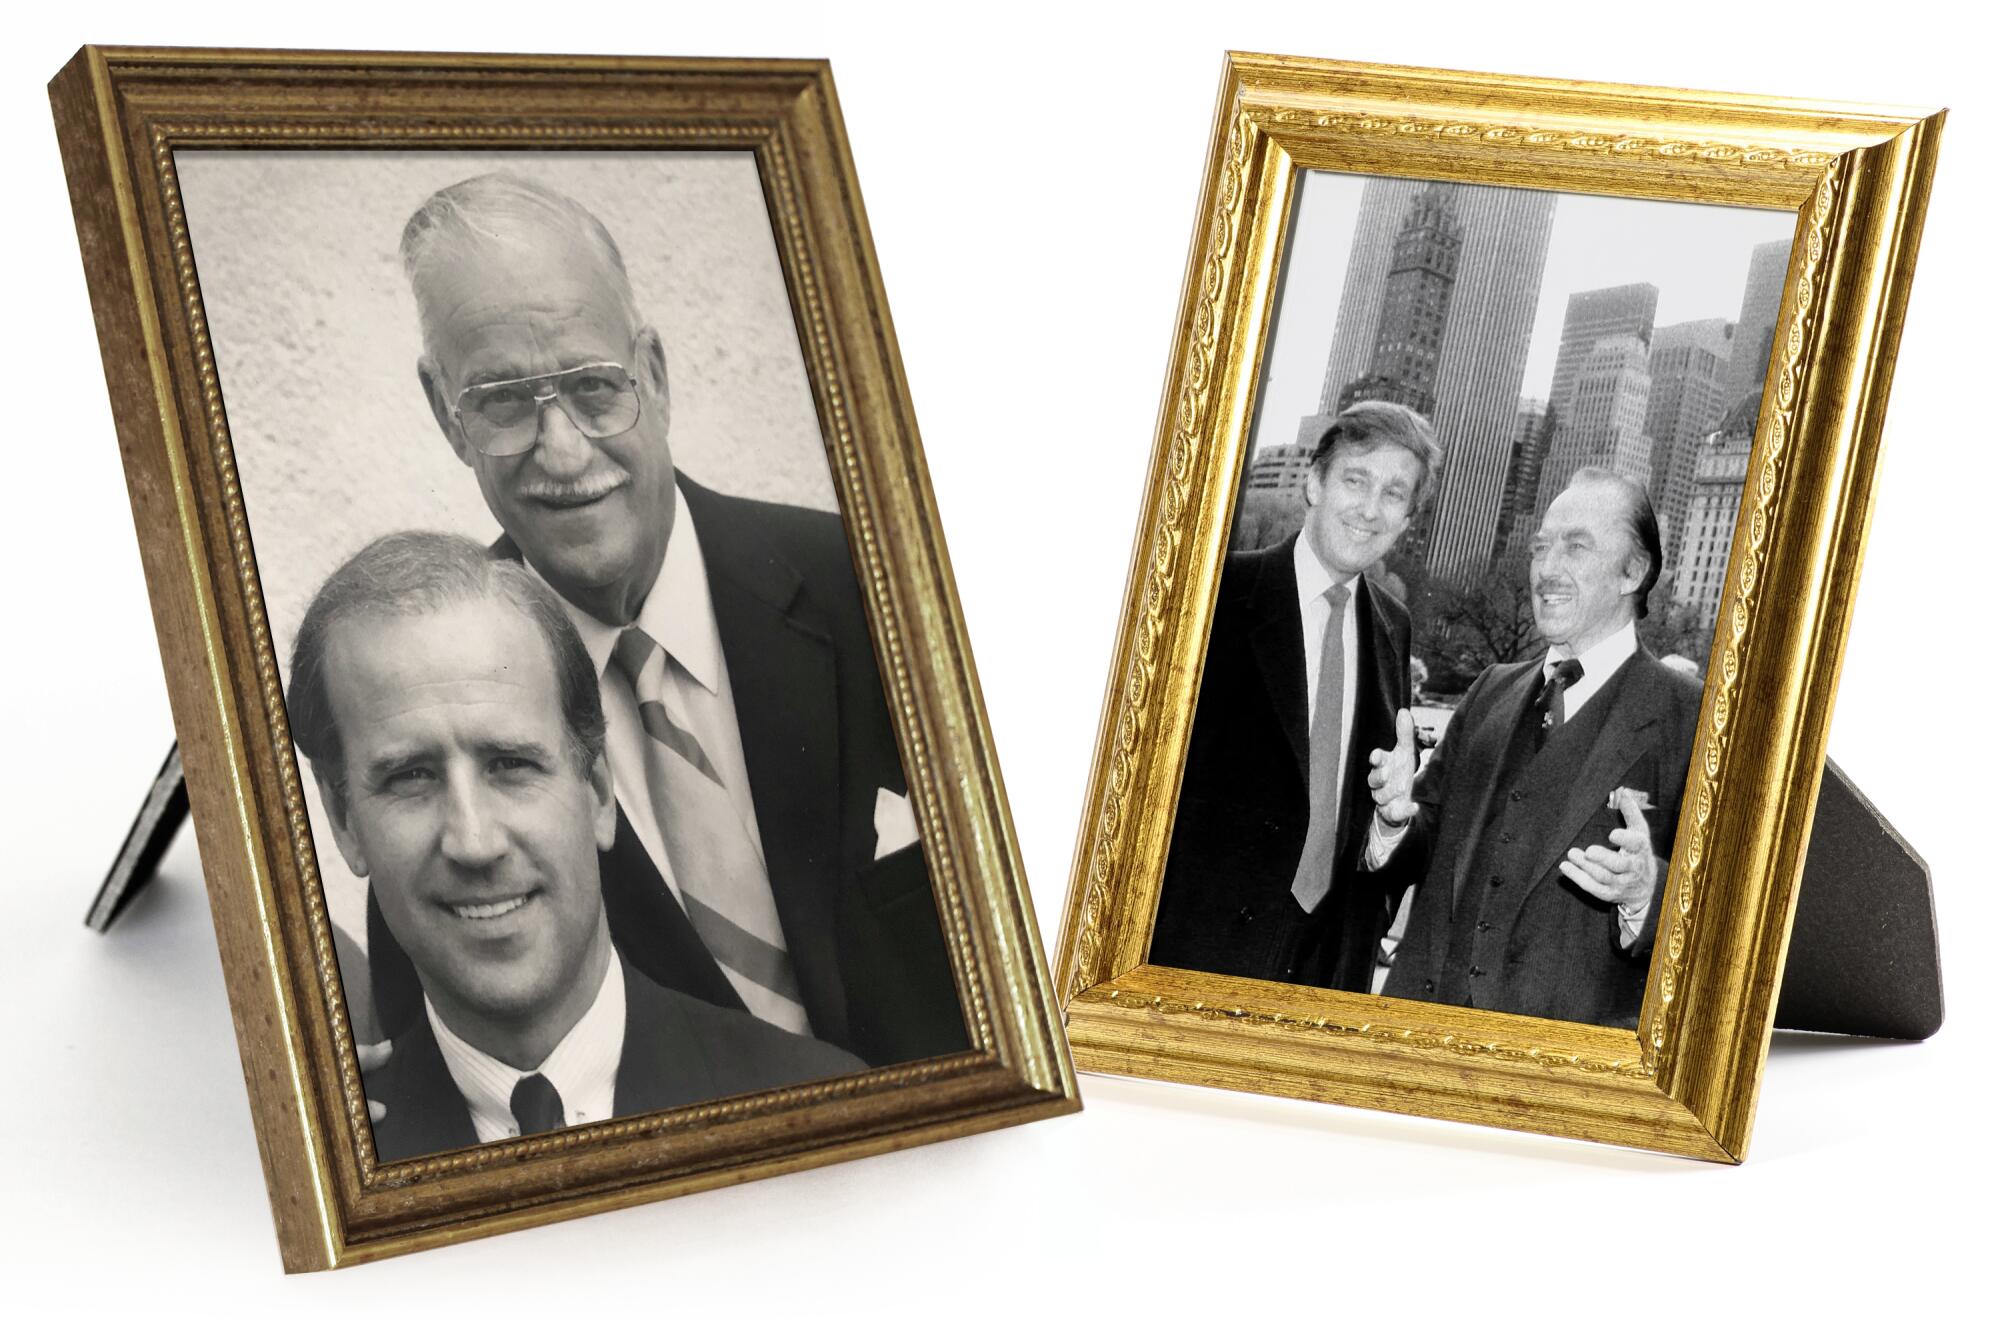 Two framed black-and-white photos, each showing a younger man and one older, both wearing suits